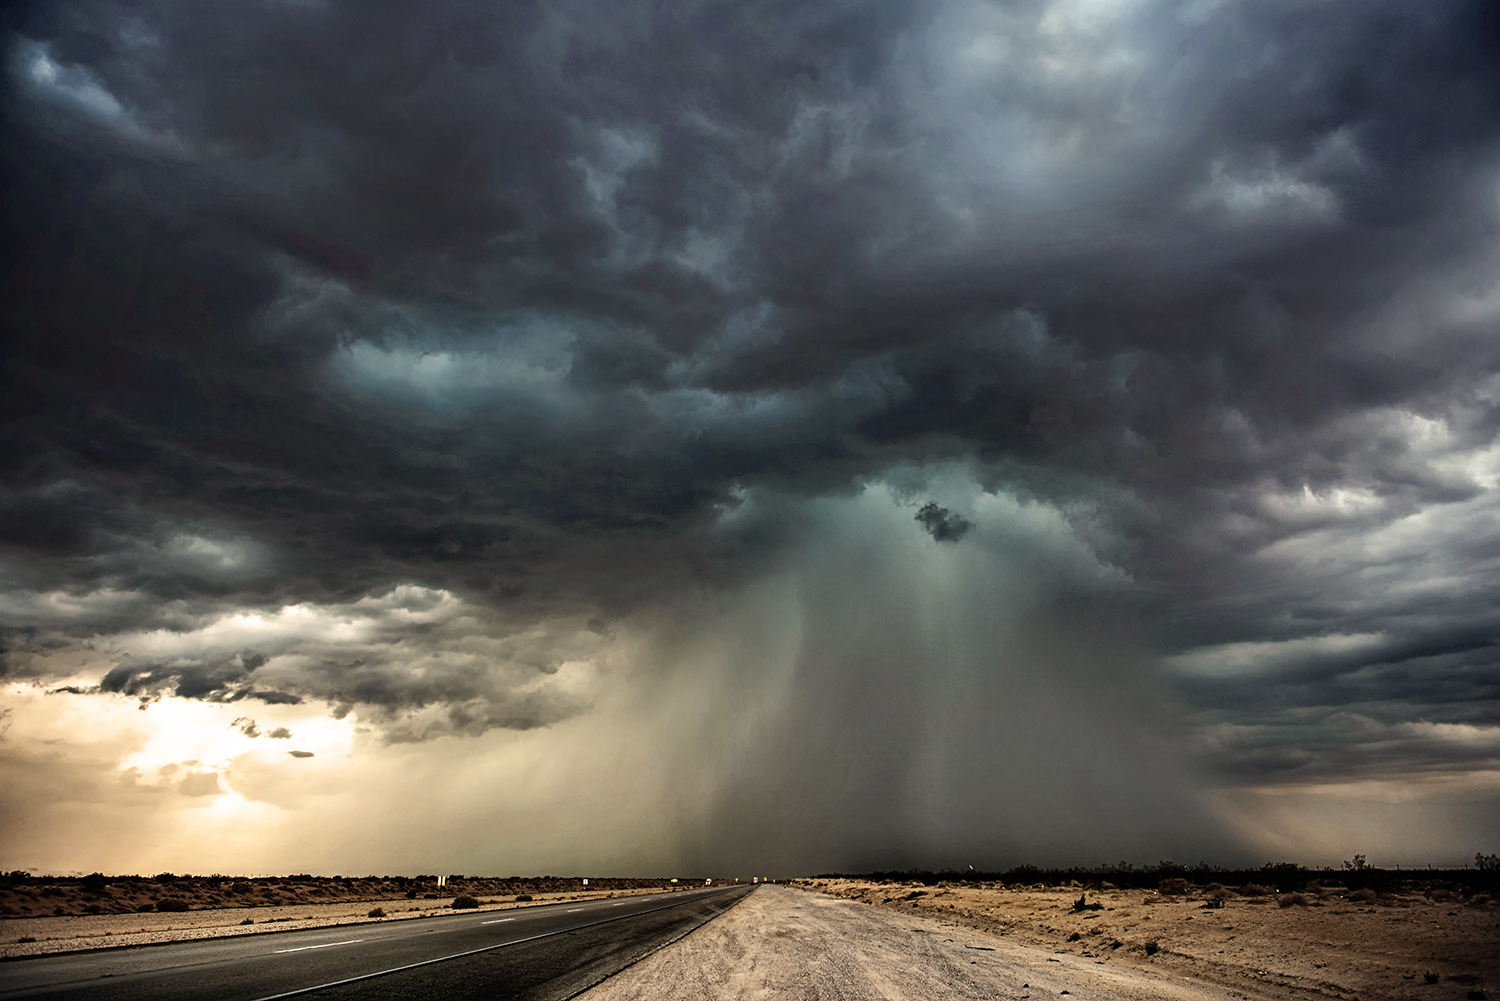 These Storm Photos Are So Perfect That They Feel Like Illustrations